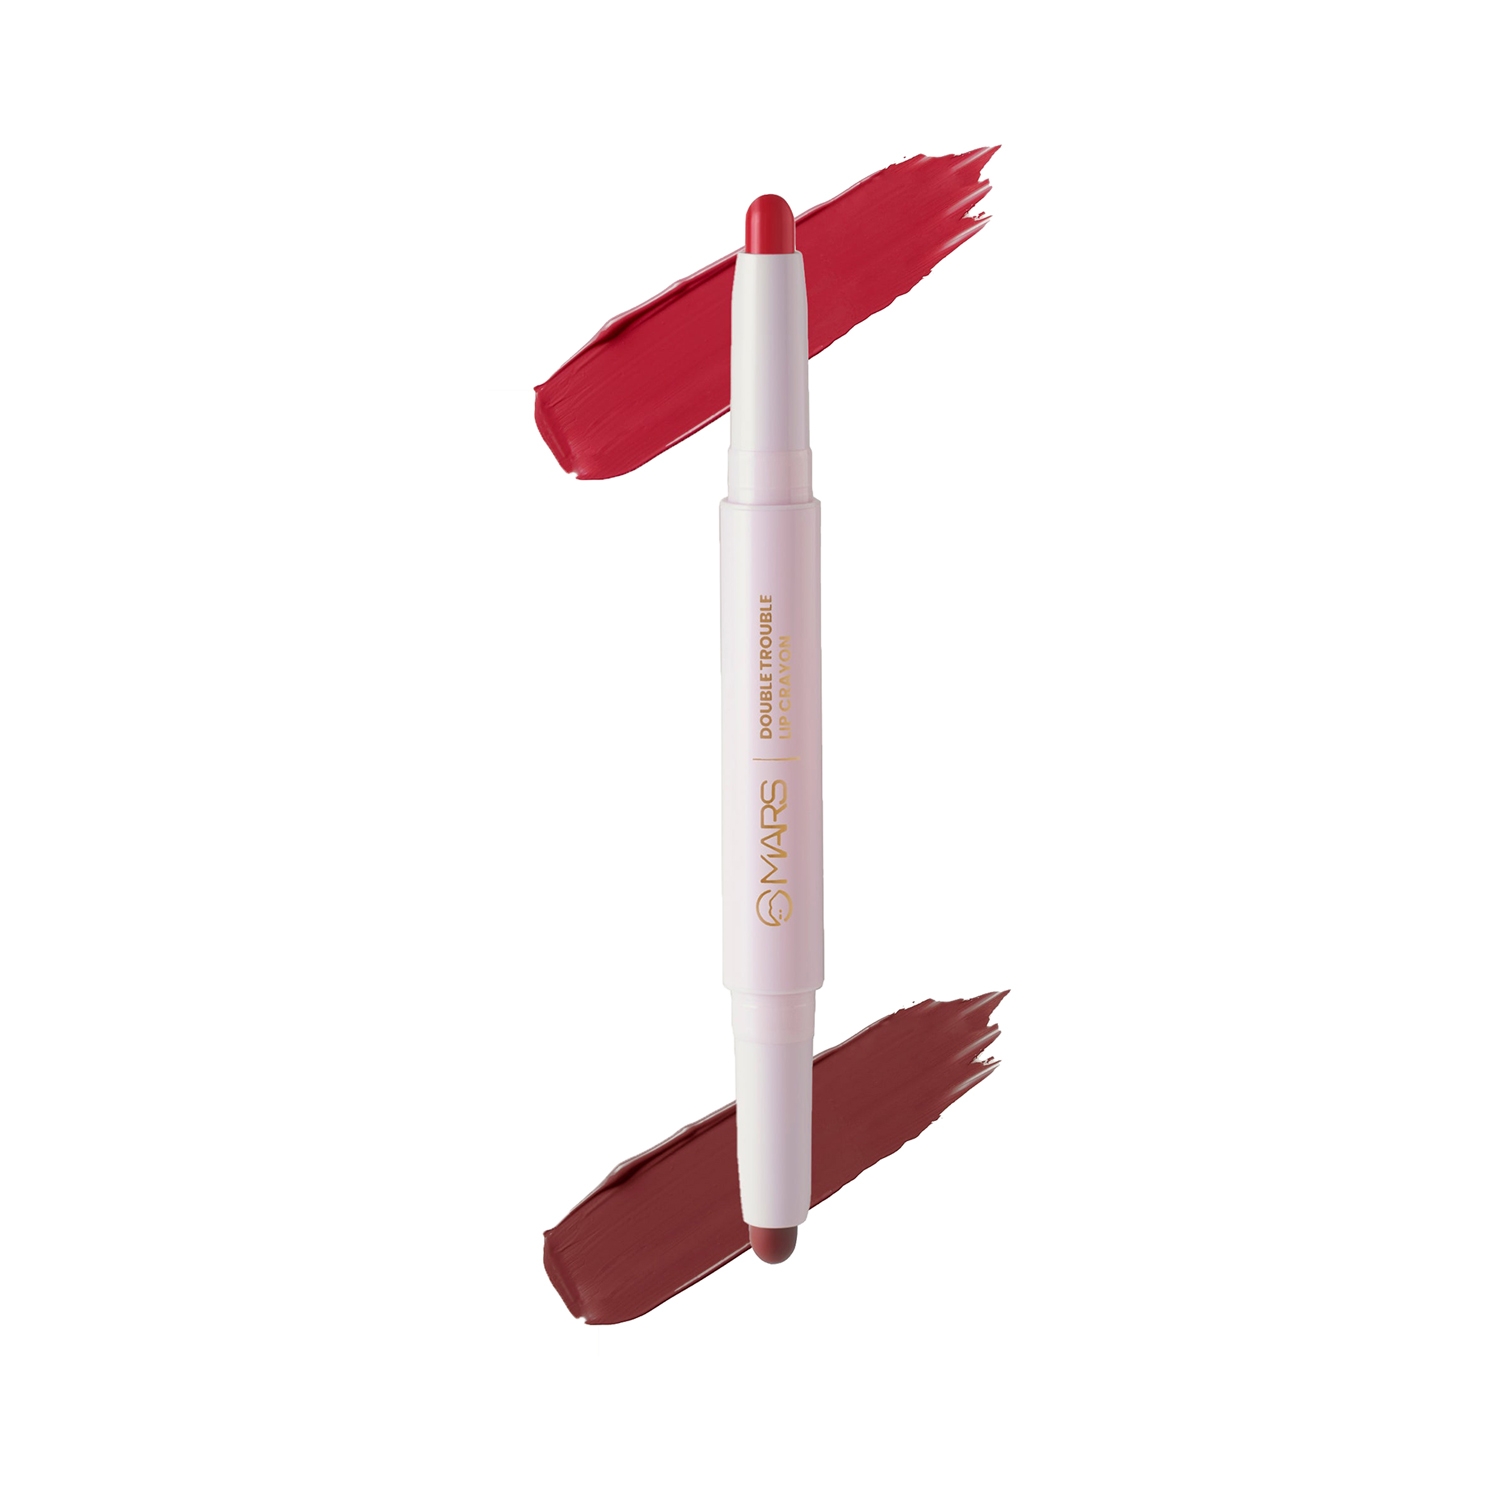 MARS | MARS Double Trouble Lip Crayon - 09 Red Brownie (4g)